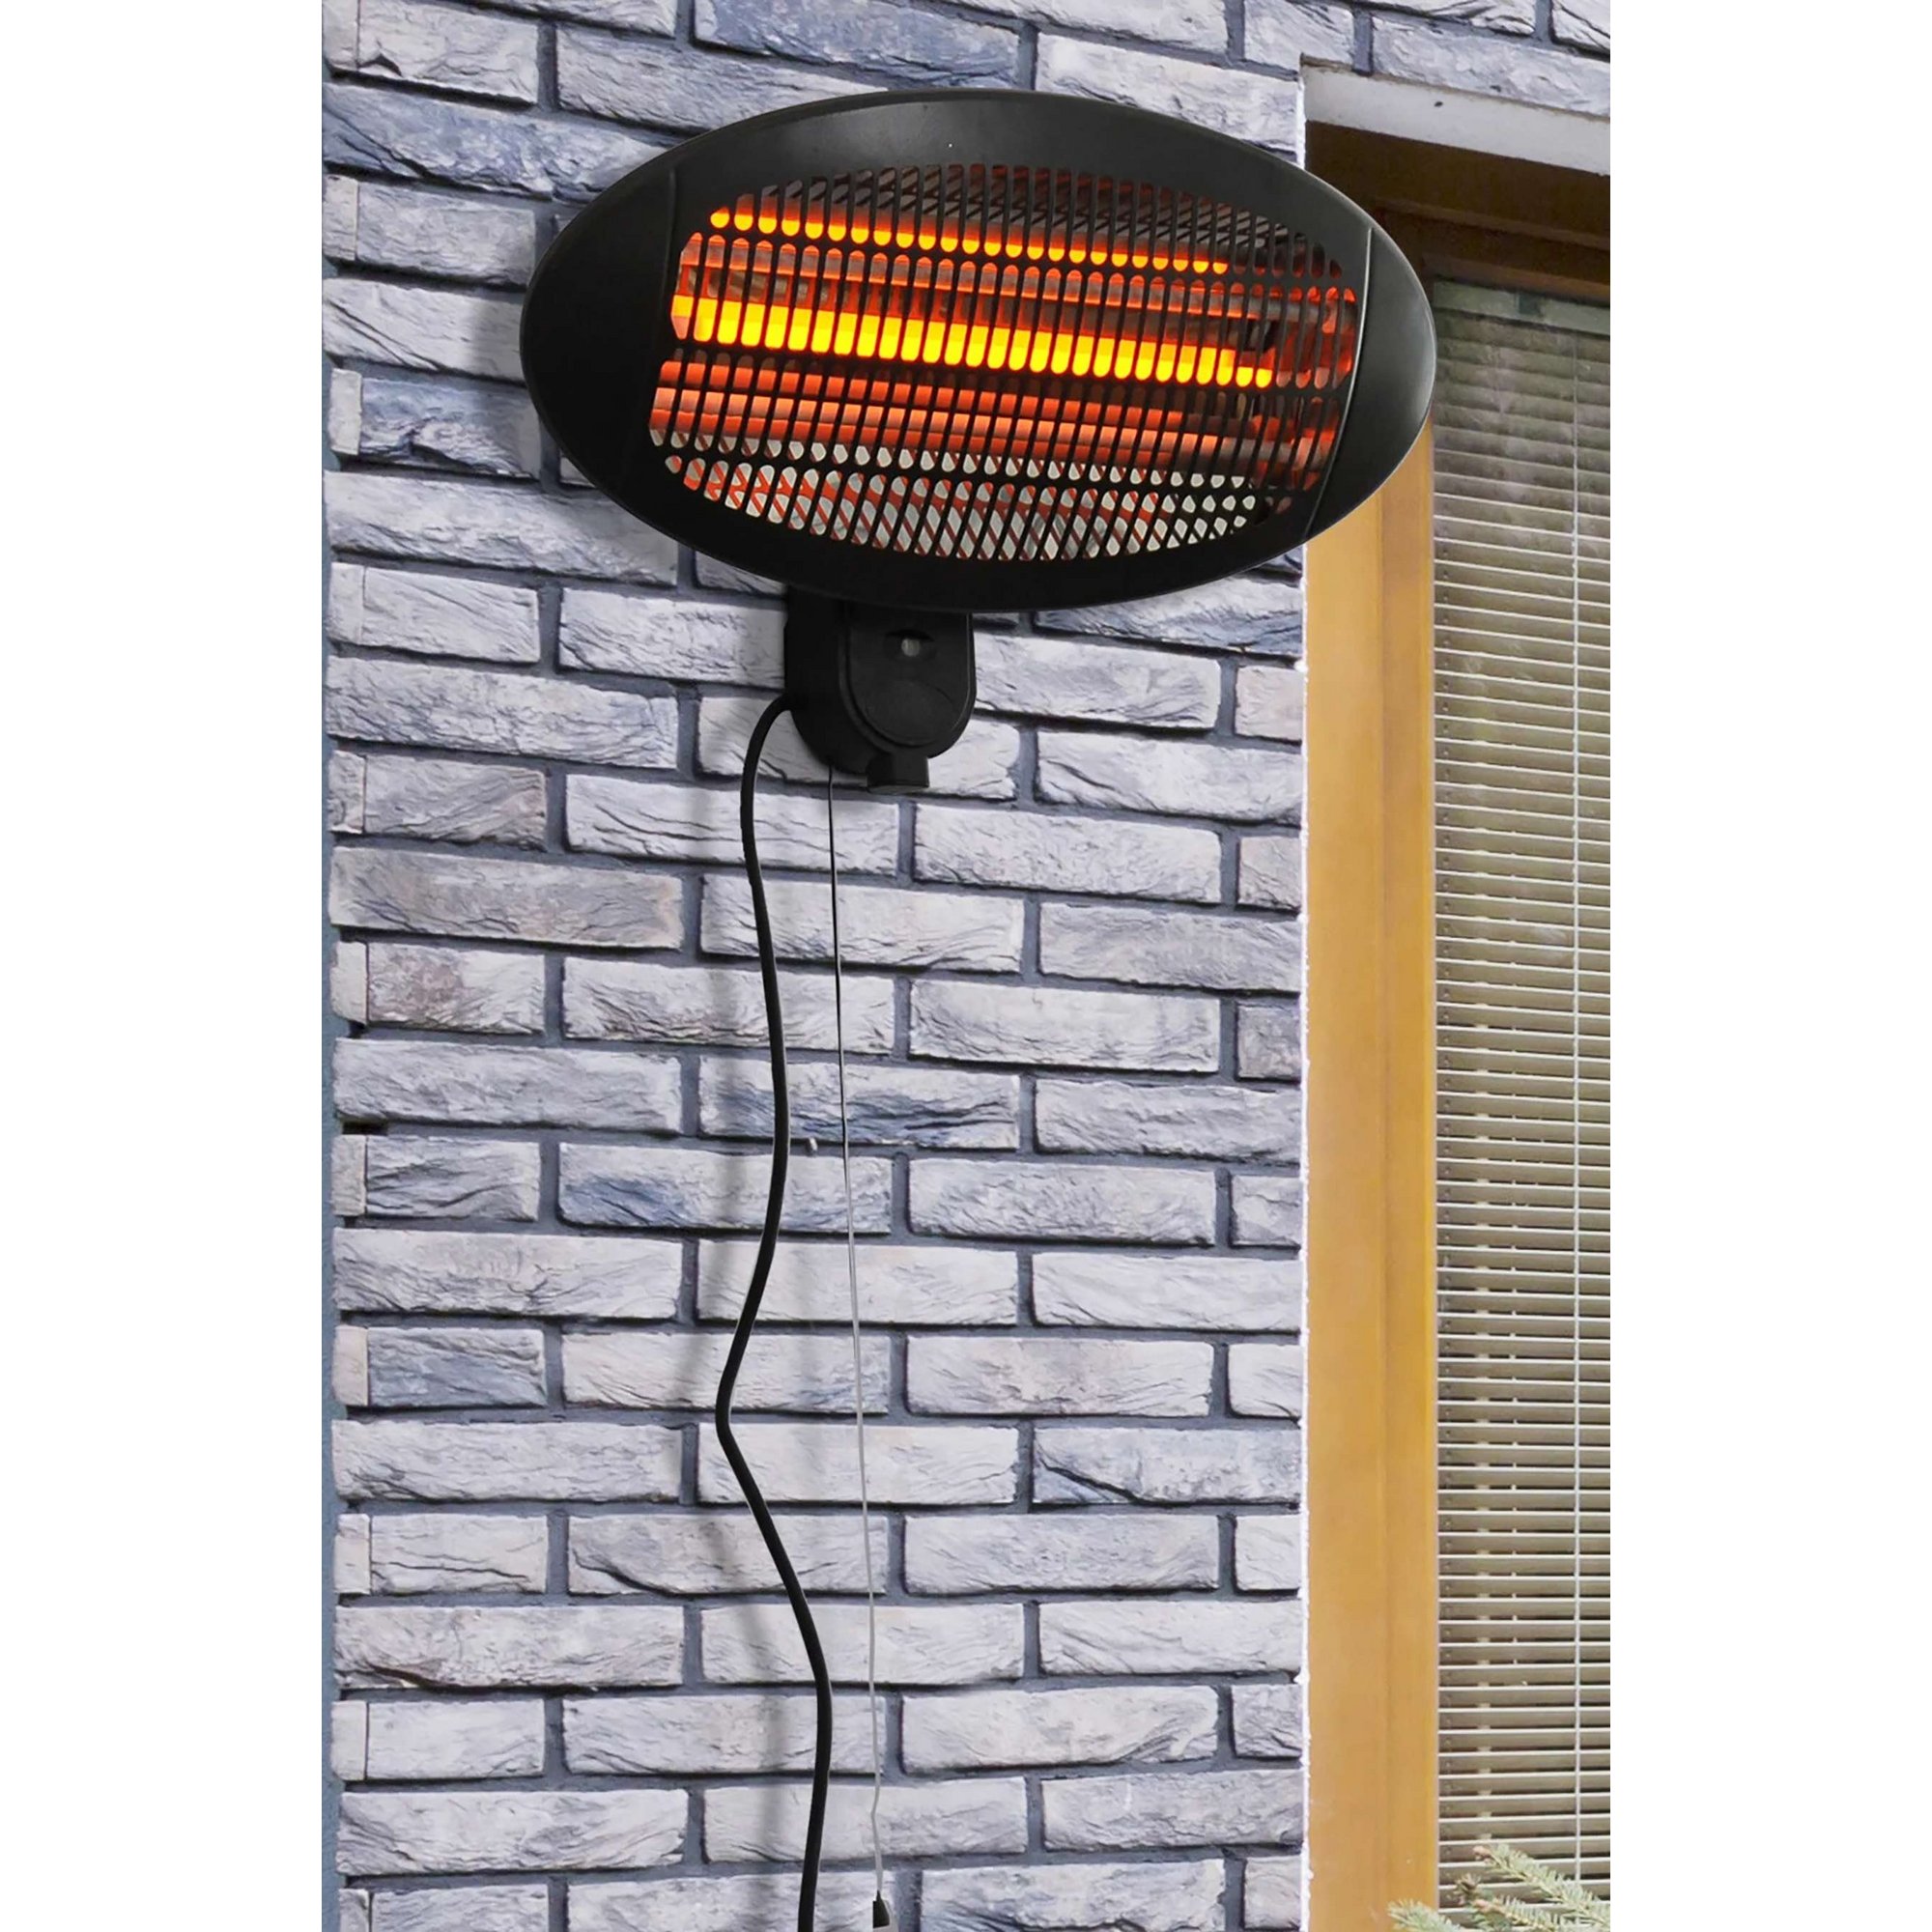 Studio Wall Mounted Electric Infrared 2000w Patio Heater | Black